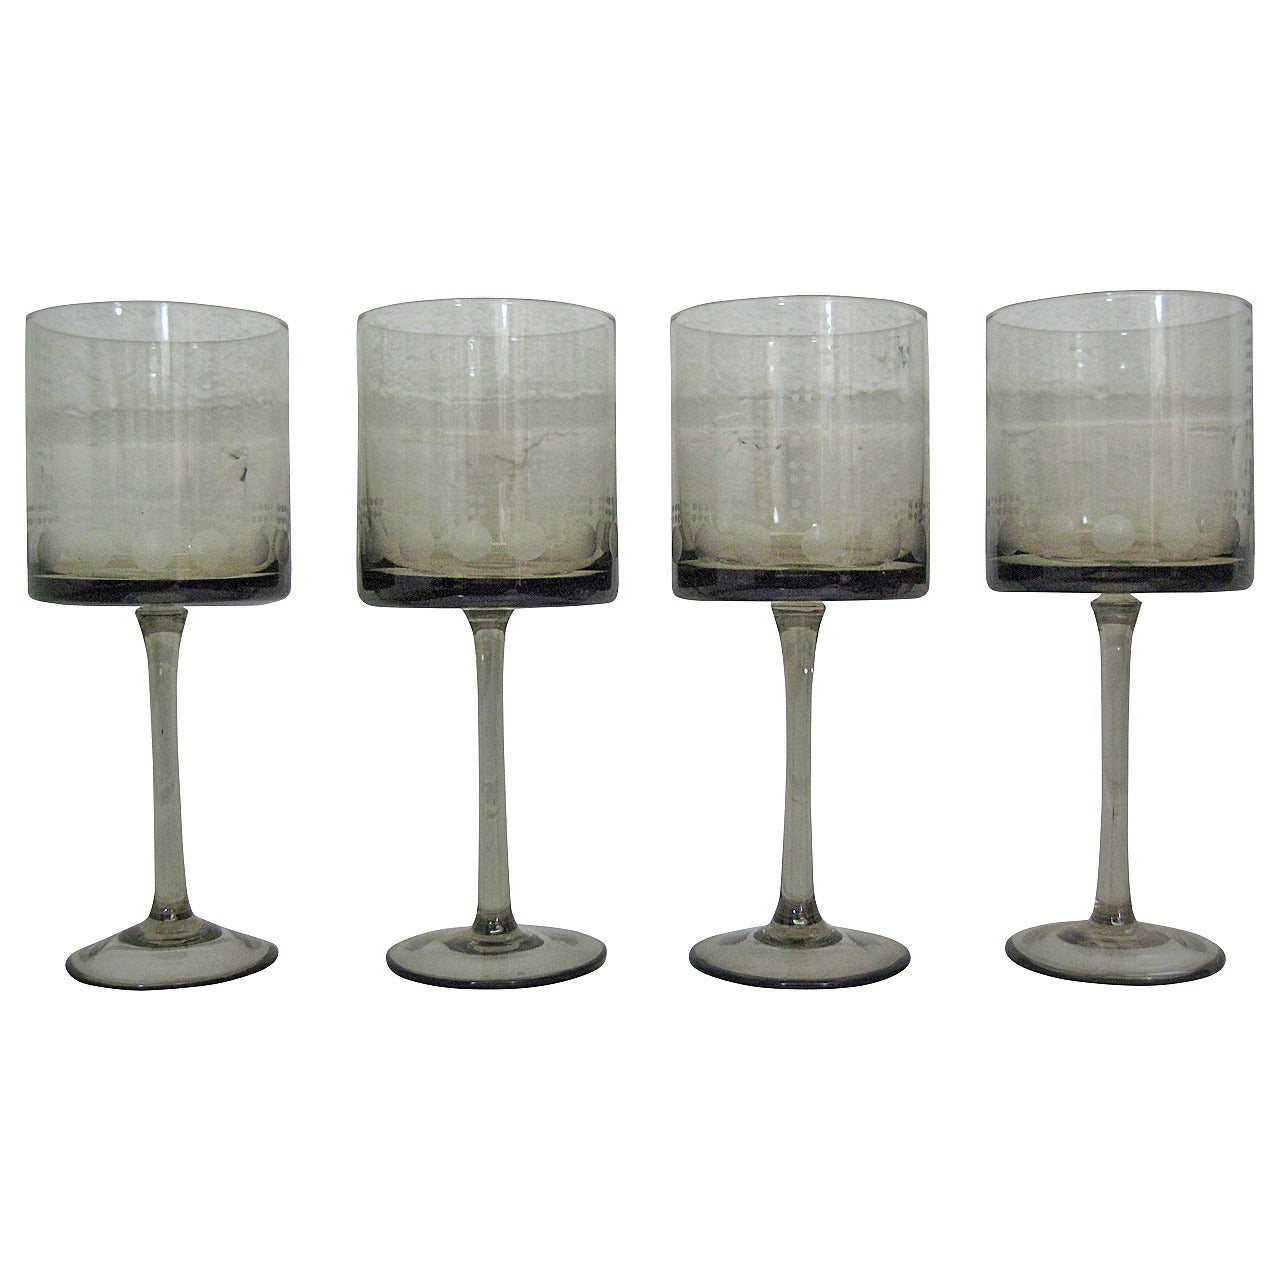 1960s Modernist Smoked Glass Wine Goblets, Set of Four